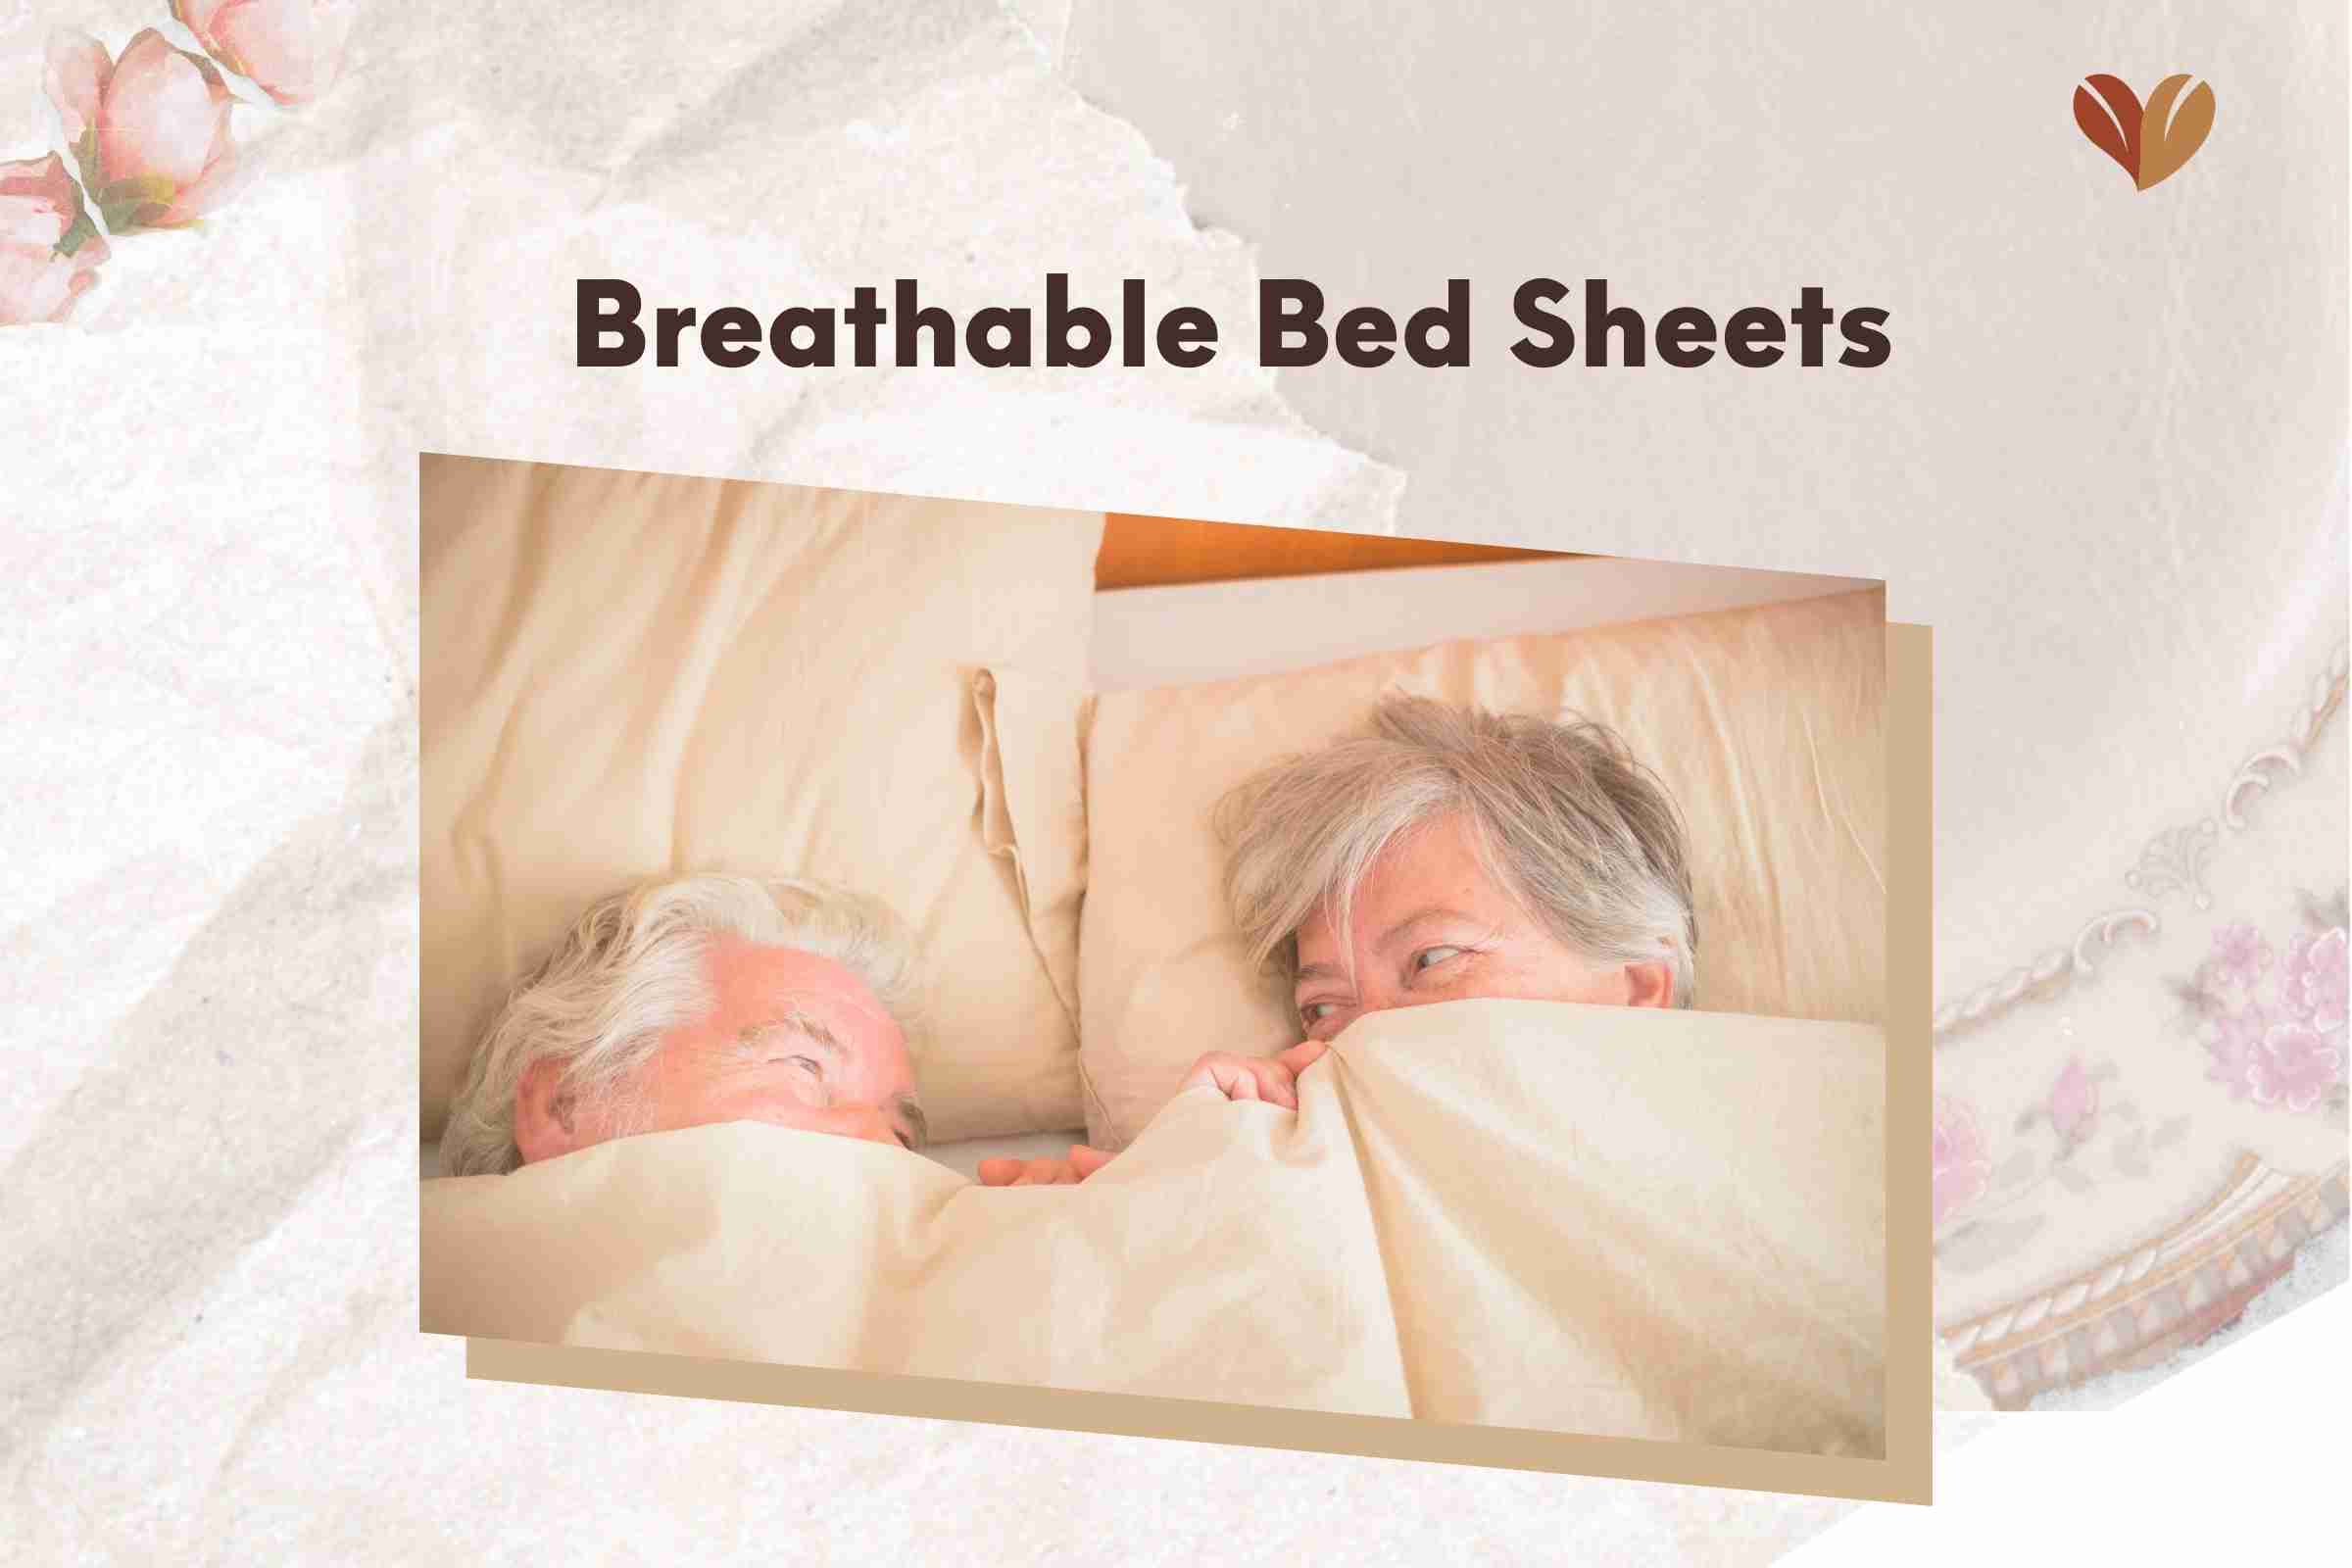 Look for sheets that are easy to care for, such as wrinkle-resistant or fade-resistant options.